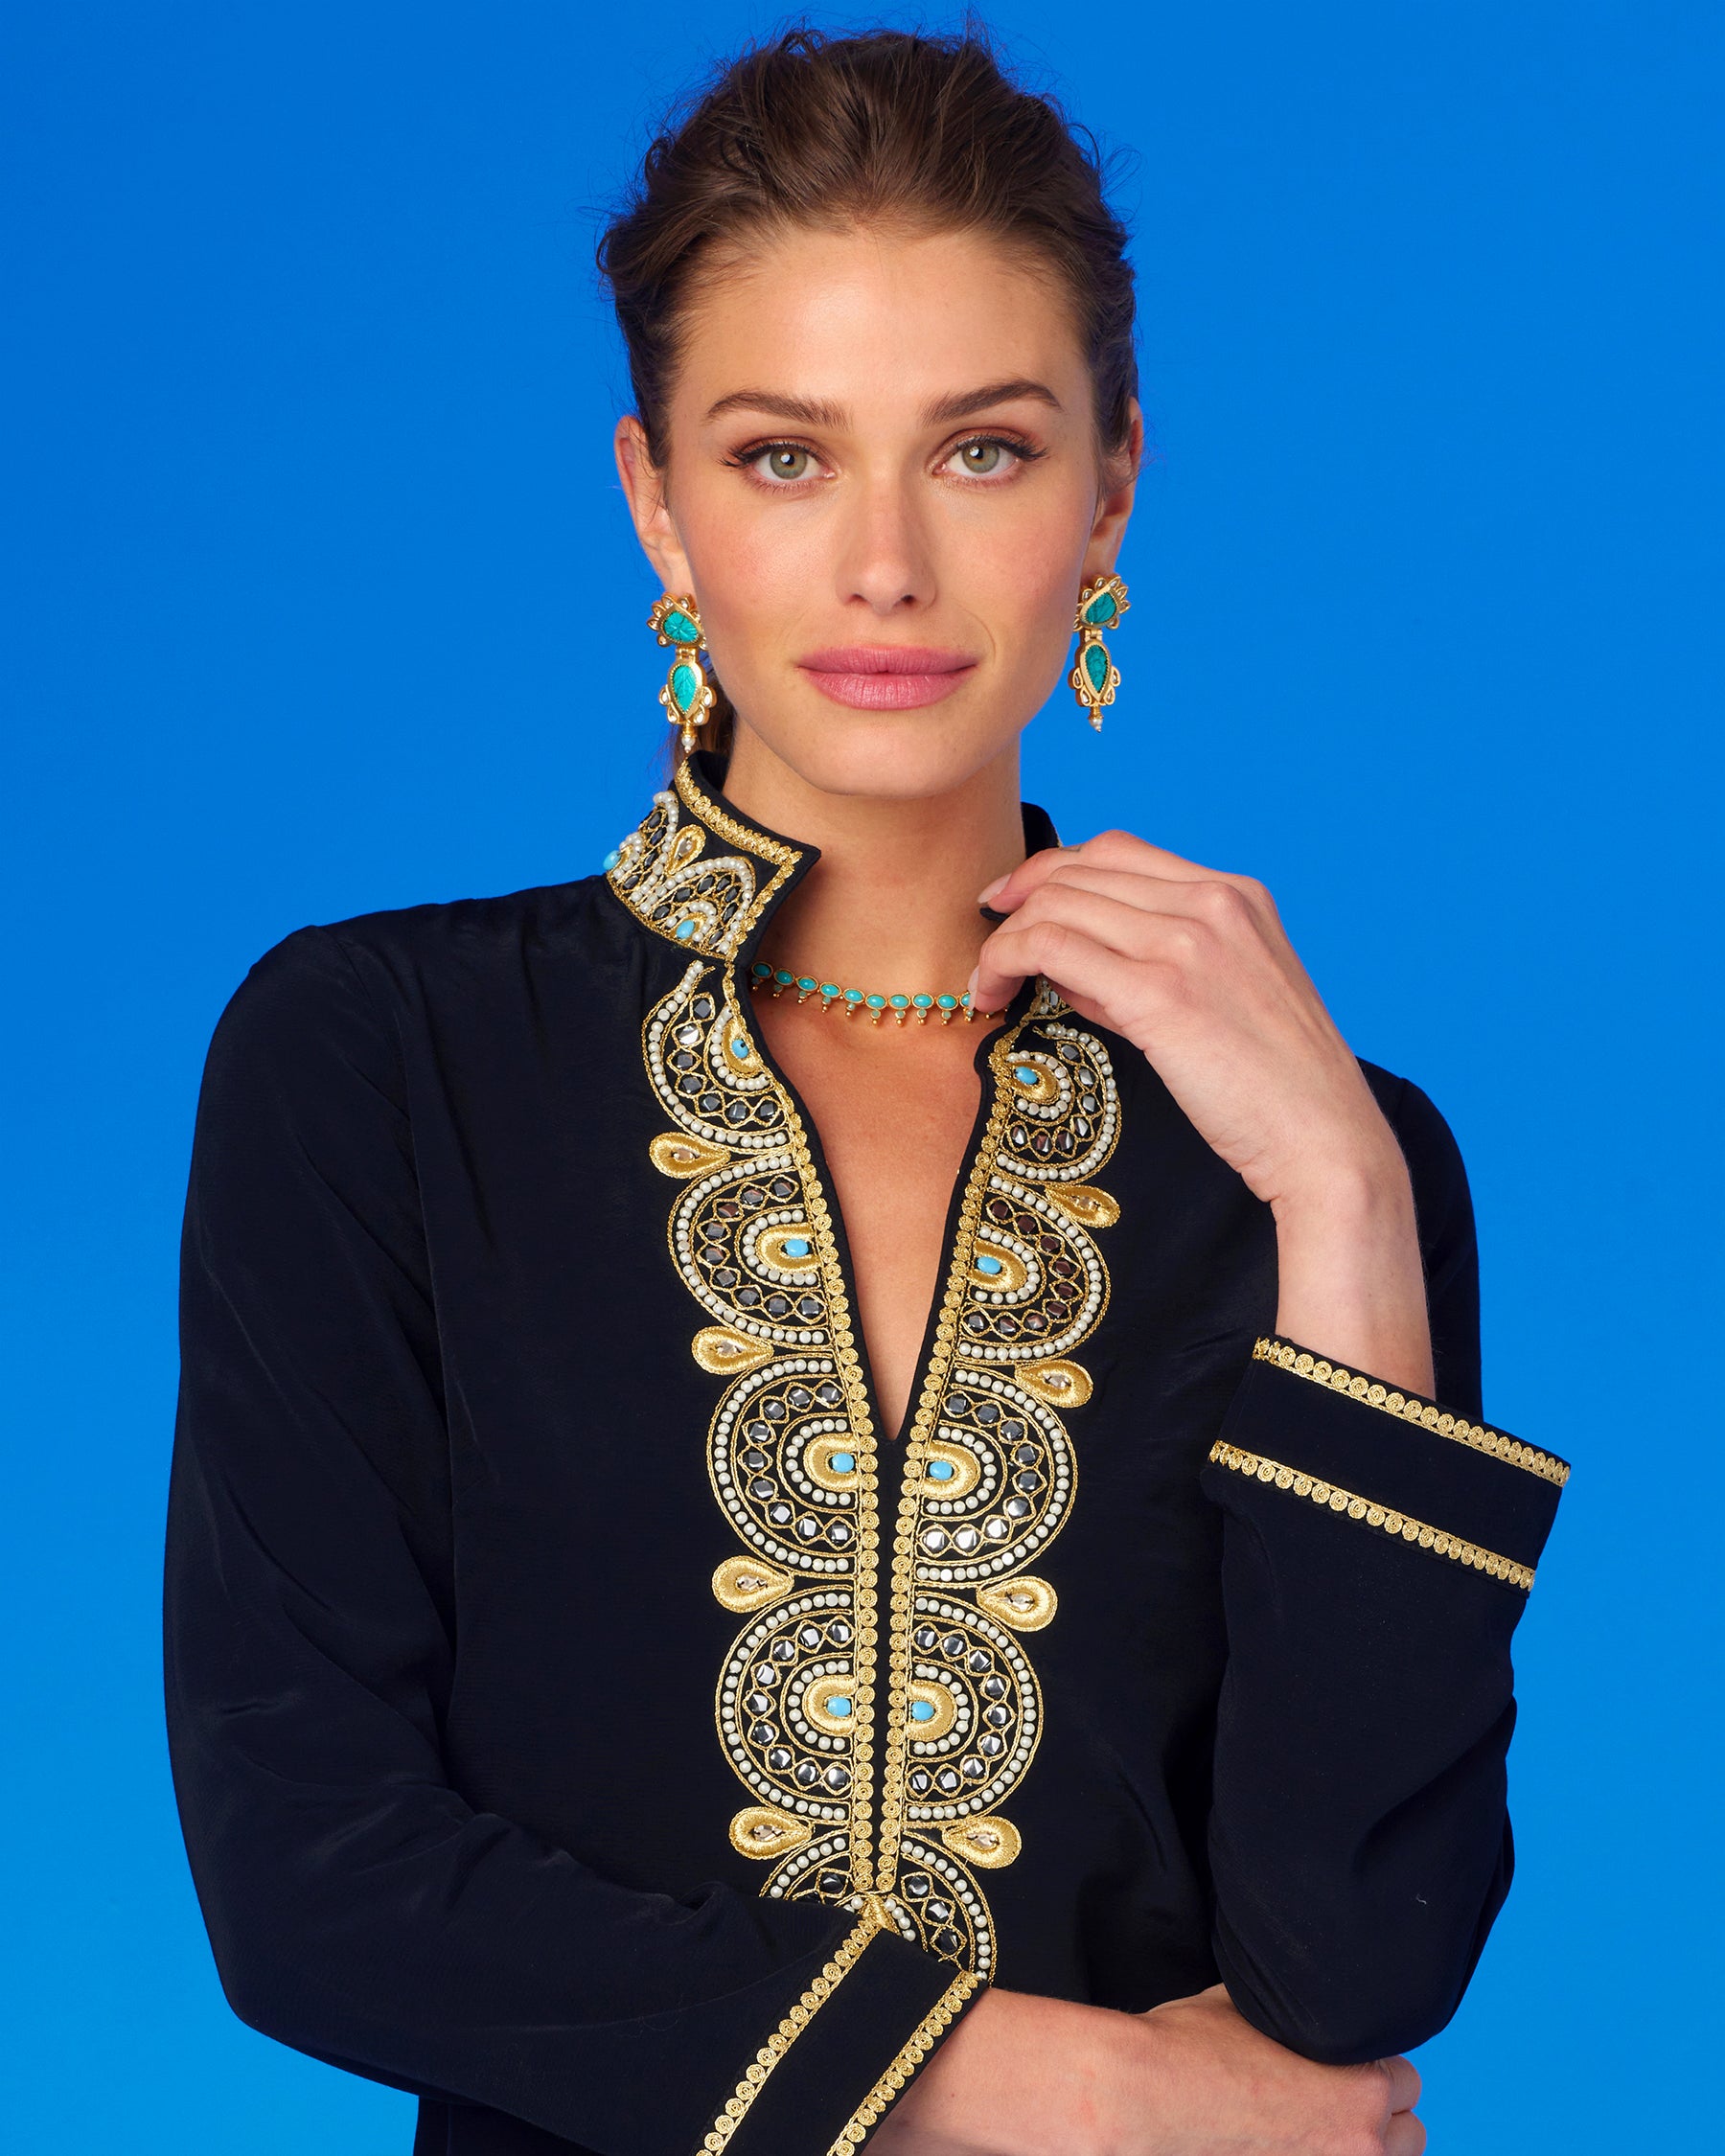 Cora Turquoise Blue String Necklace-Worn with the Noor Black Tunic